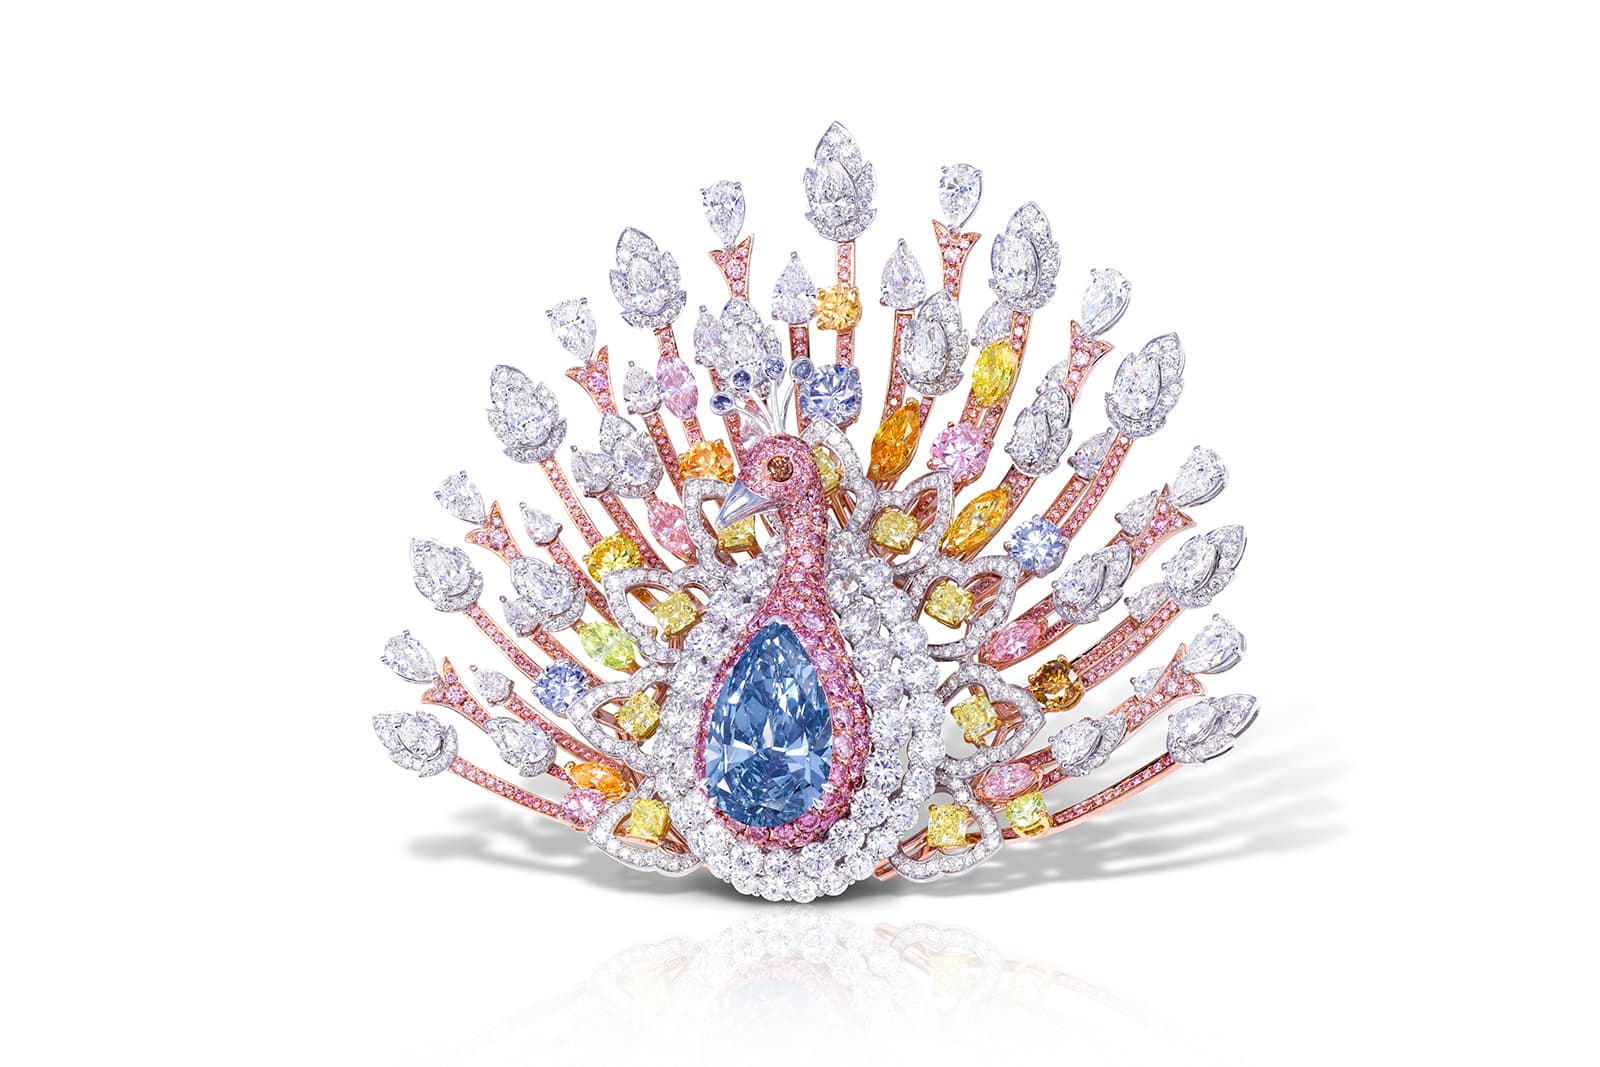 Valued at US$100 million, the array of rare coloured diamonds in Graff’s Peacock brooch include a 20.02 carat Fancy Deep Blue pear shape diamond